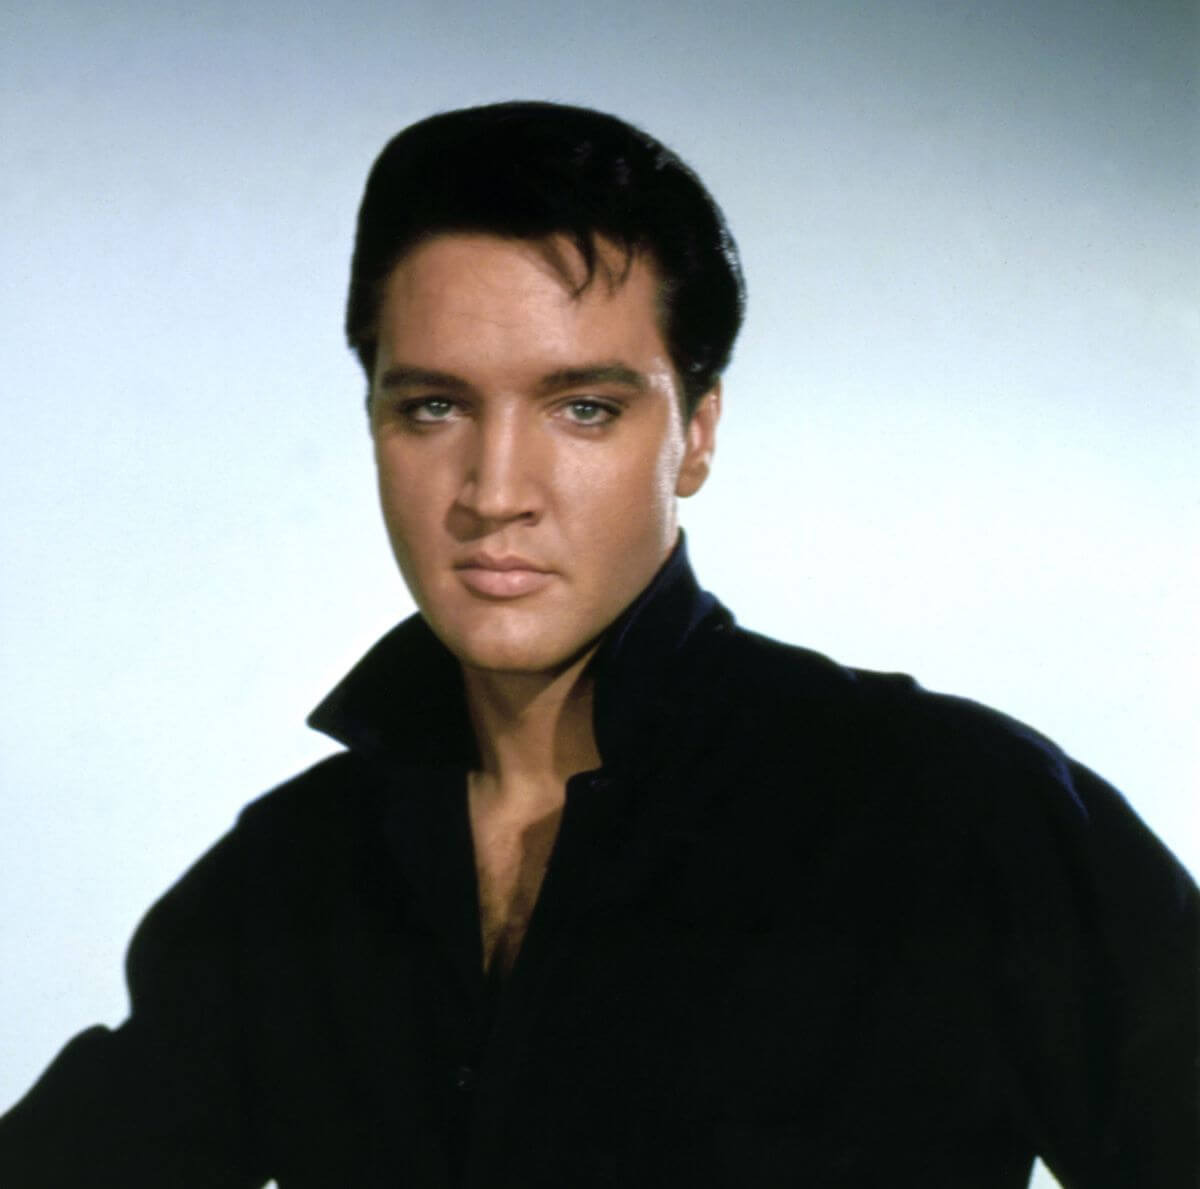 Elvis wears a black shirt with a popped collar.